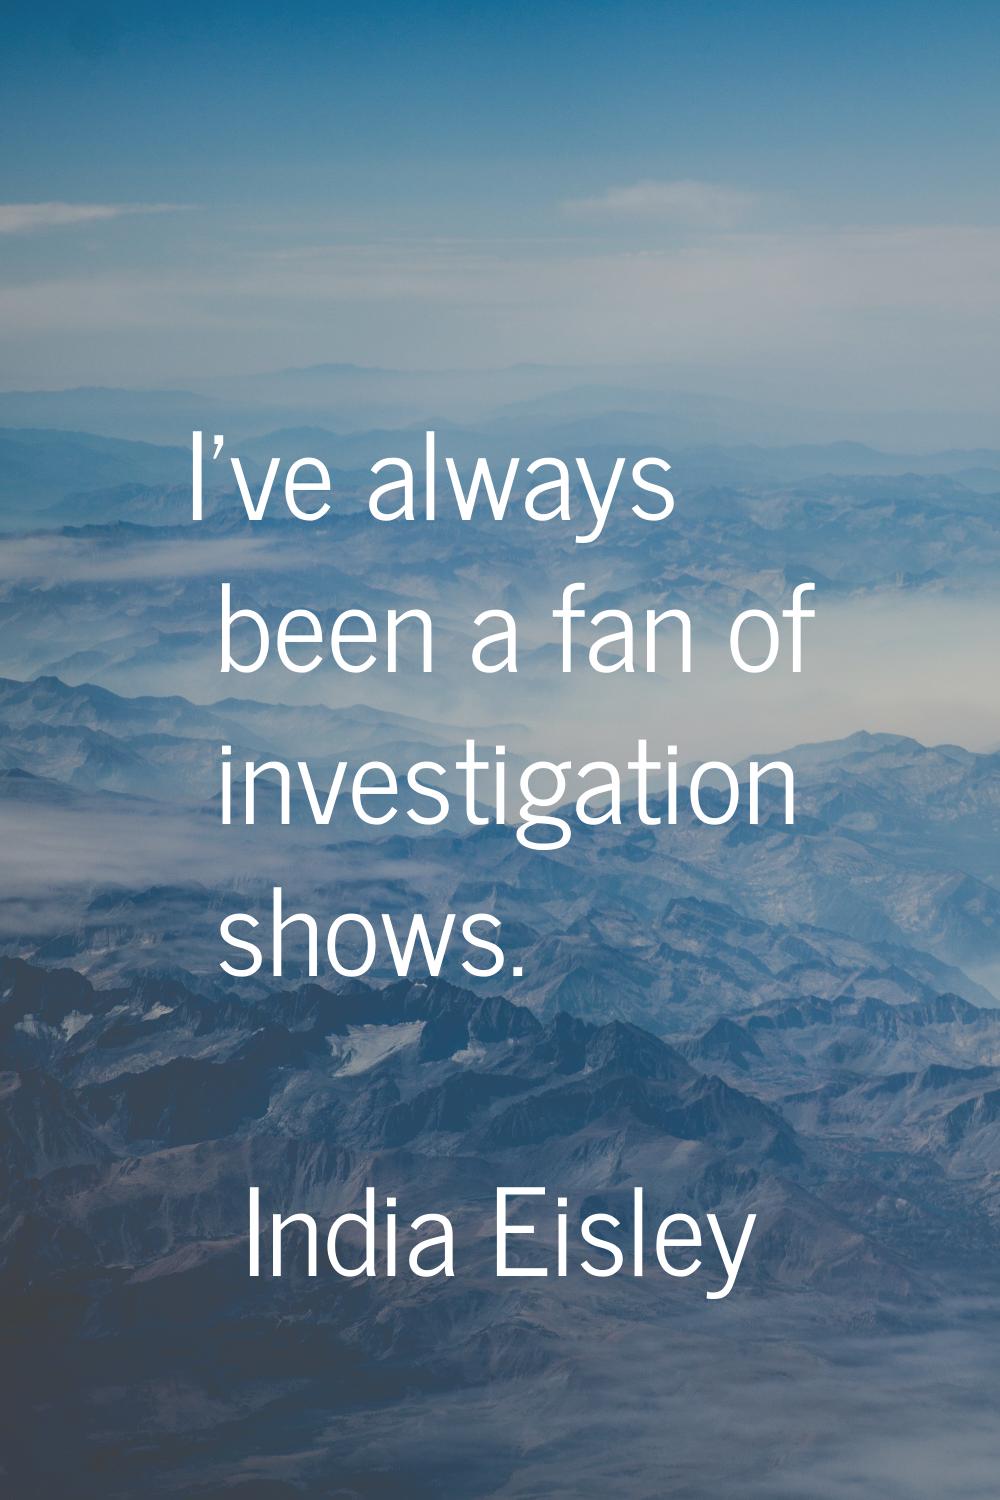 I've always been a fan of investigation shows.